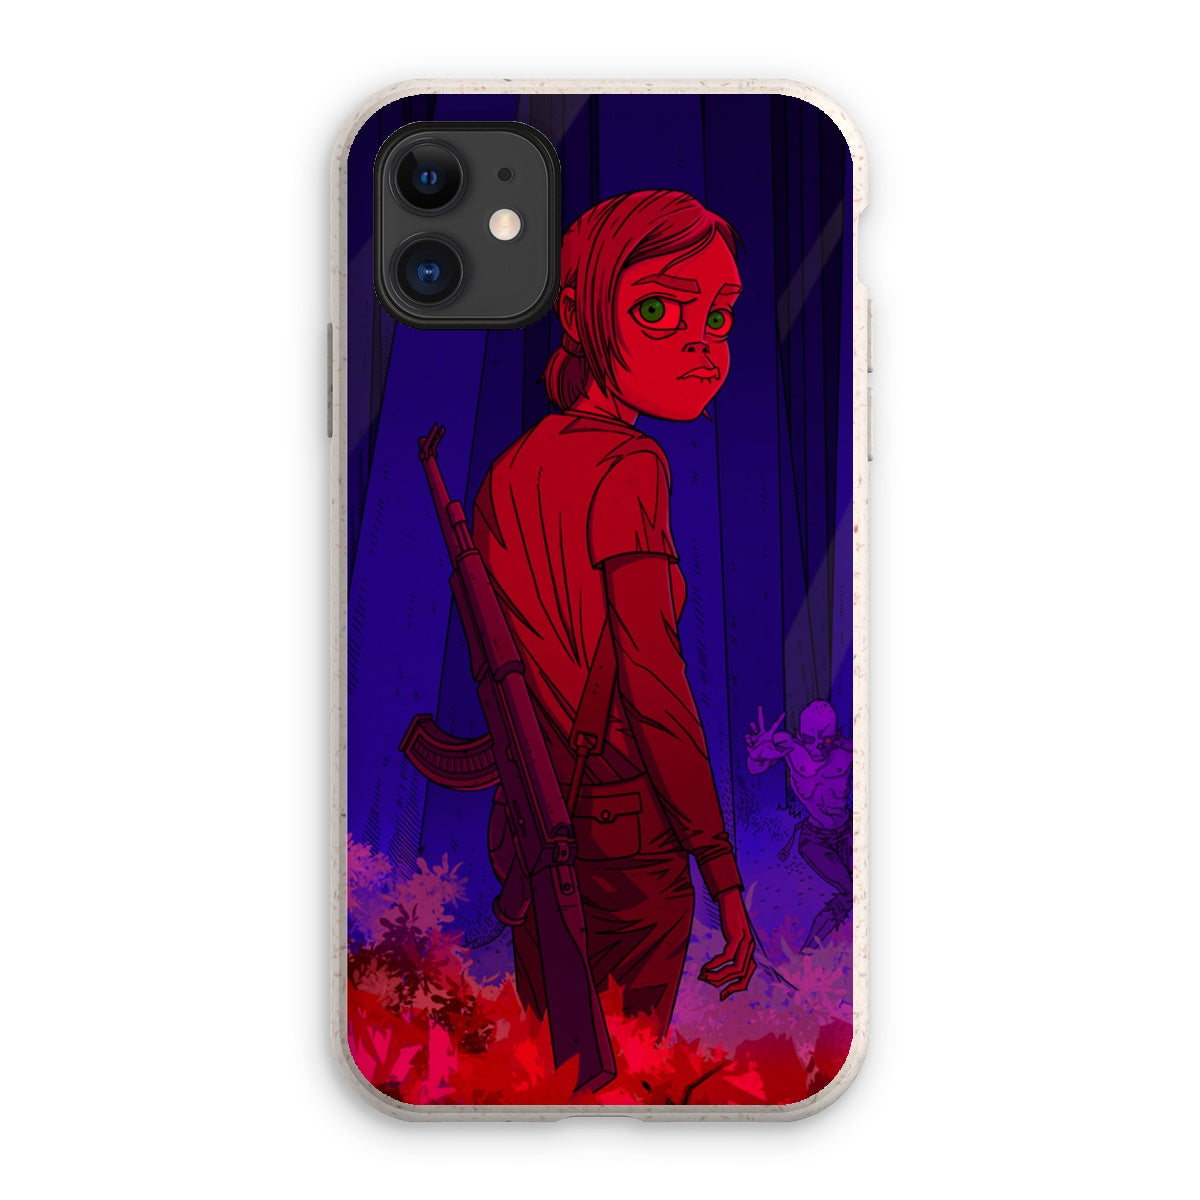 Unique and cool Gorillaz-style zombie game phone case illustration